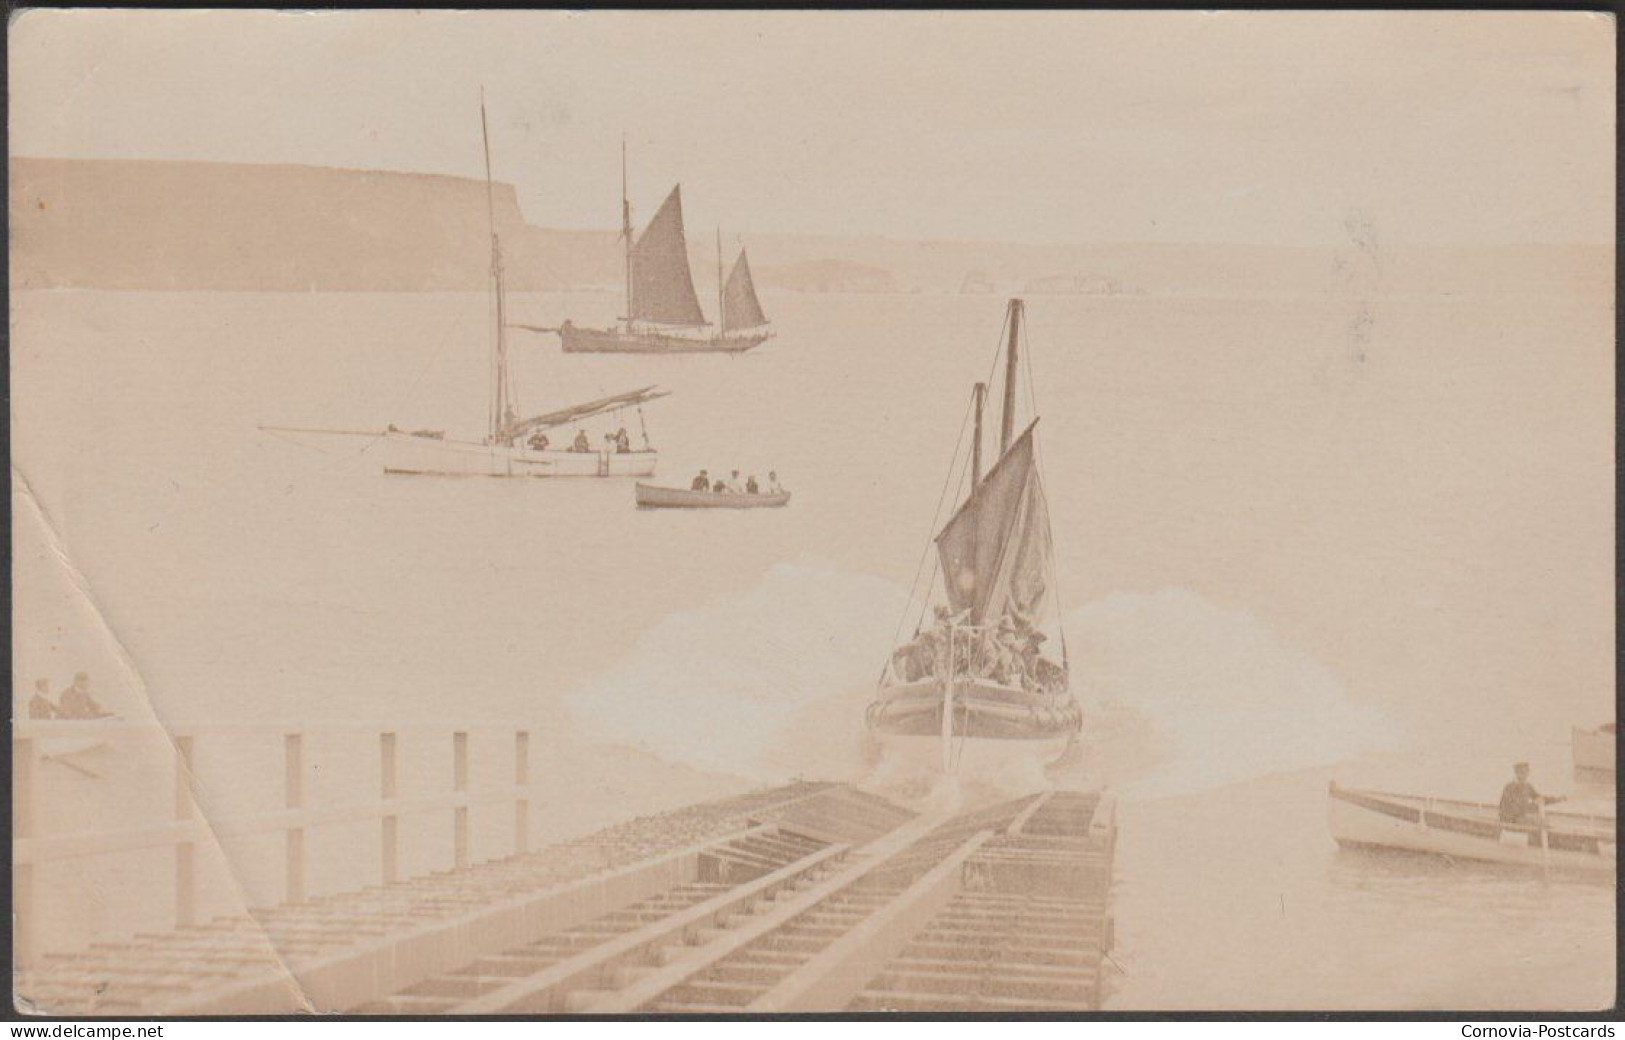 Launching Of The Tenby Lifeboat, Pembrokeshire, 1915 - Mortimer Allen RP Postcard - Pembrokeshire